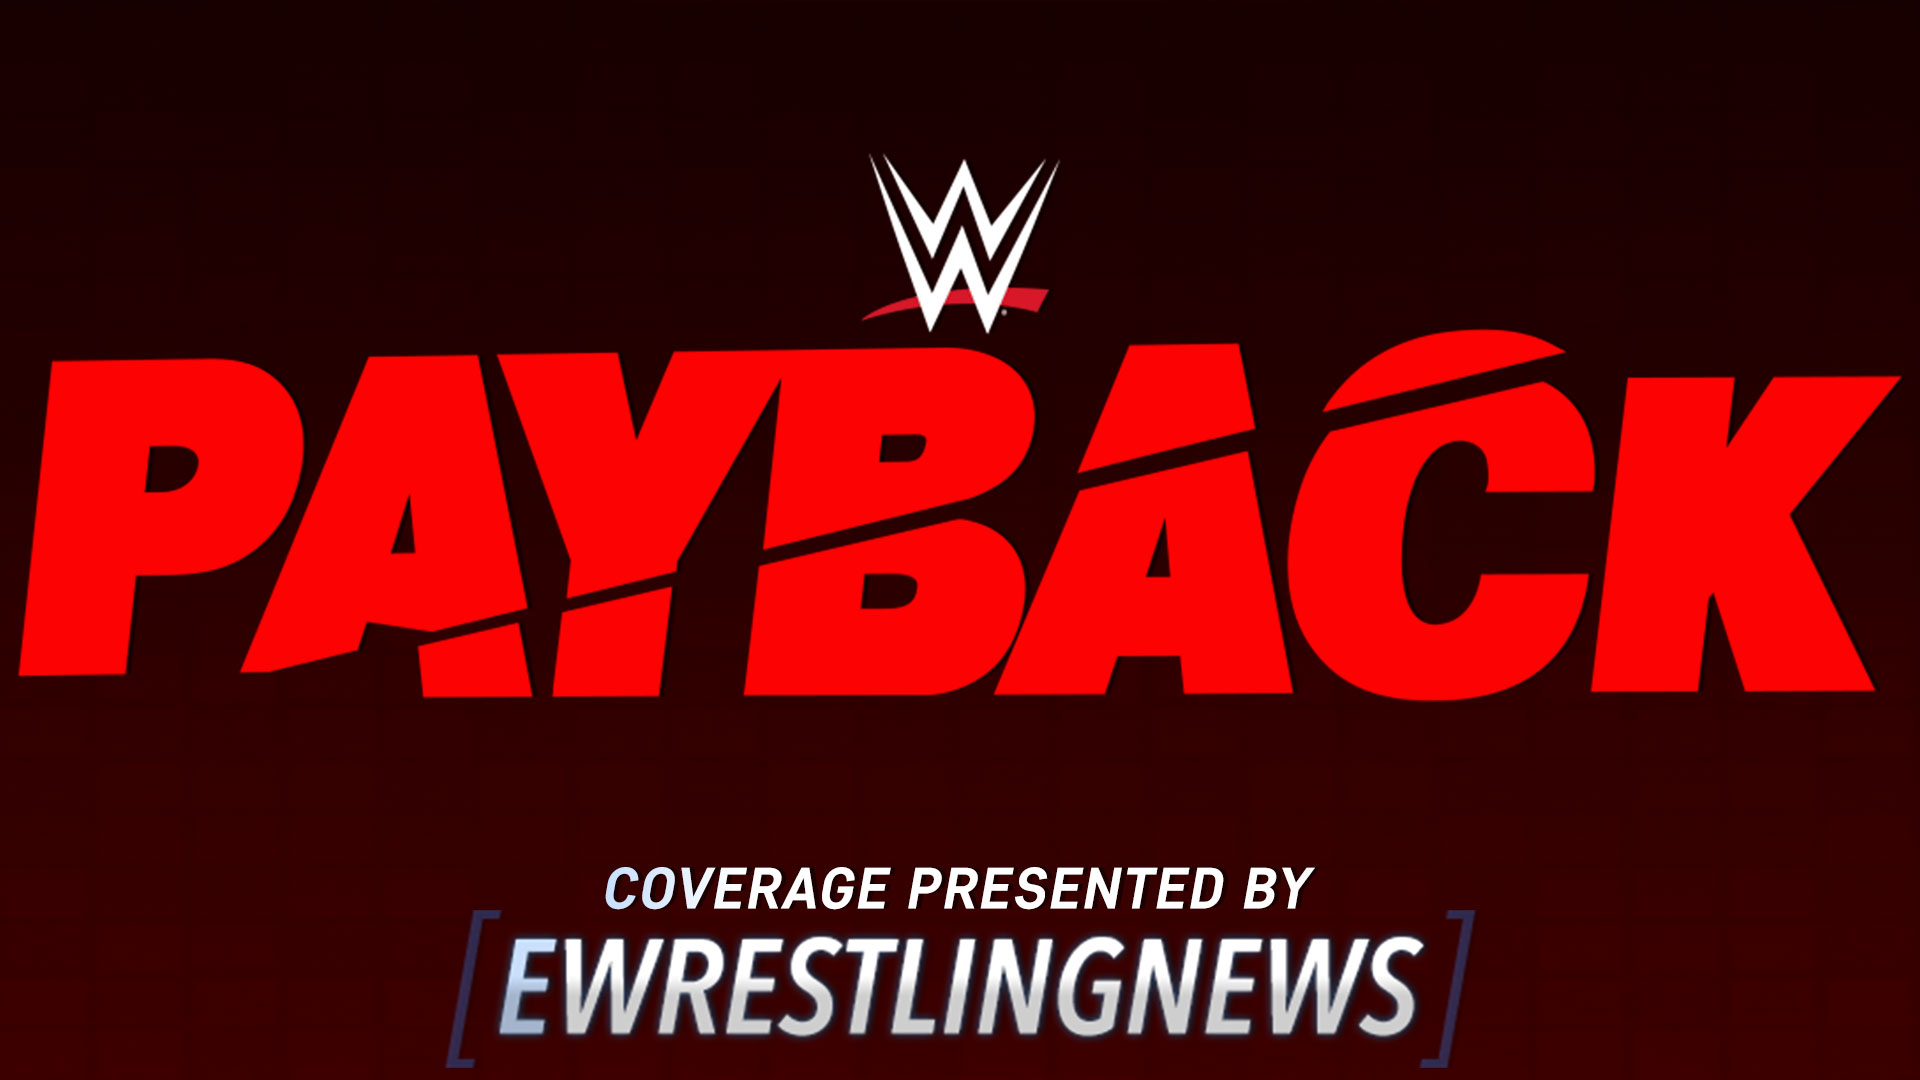 WWE Payback News Reigns Reacts To Universal Championship Win, Big E